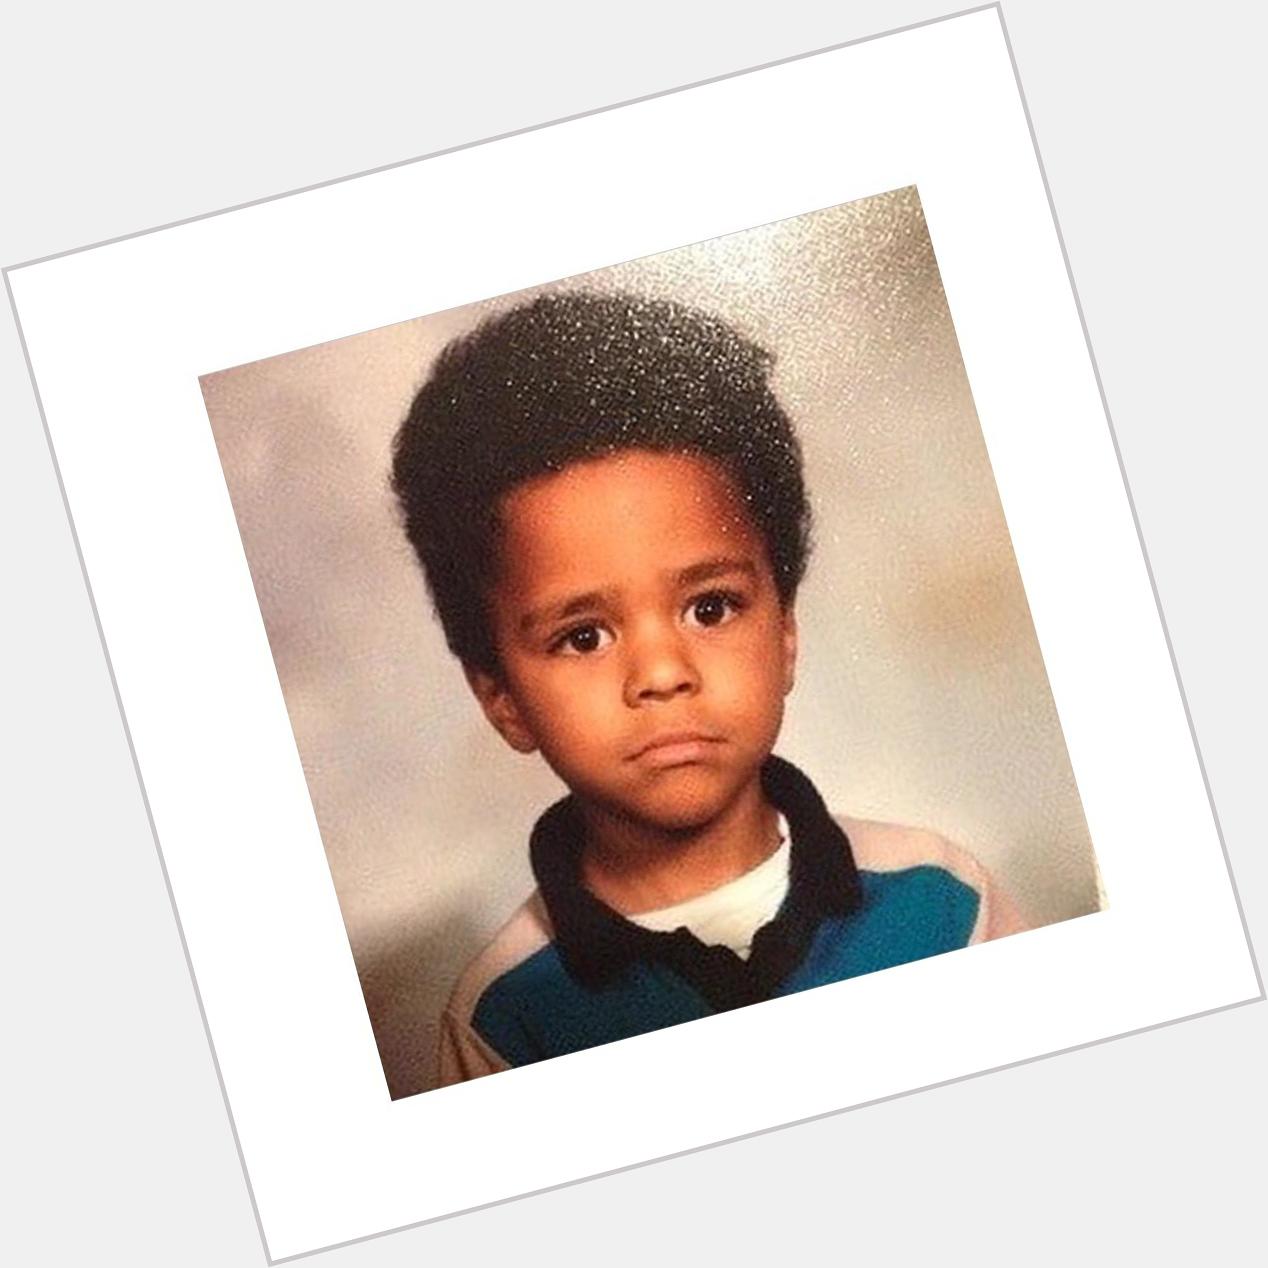 Happy birthday to the realest rapper known to mankind, J.Cole.  